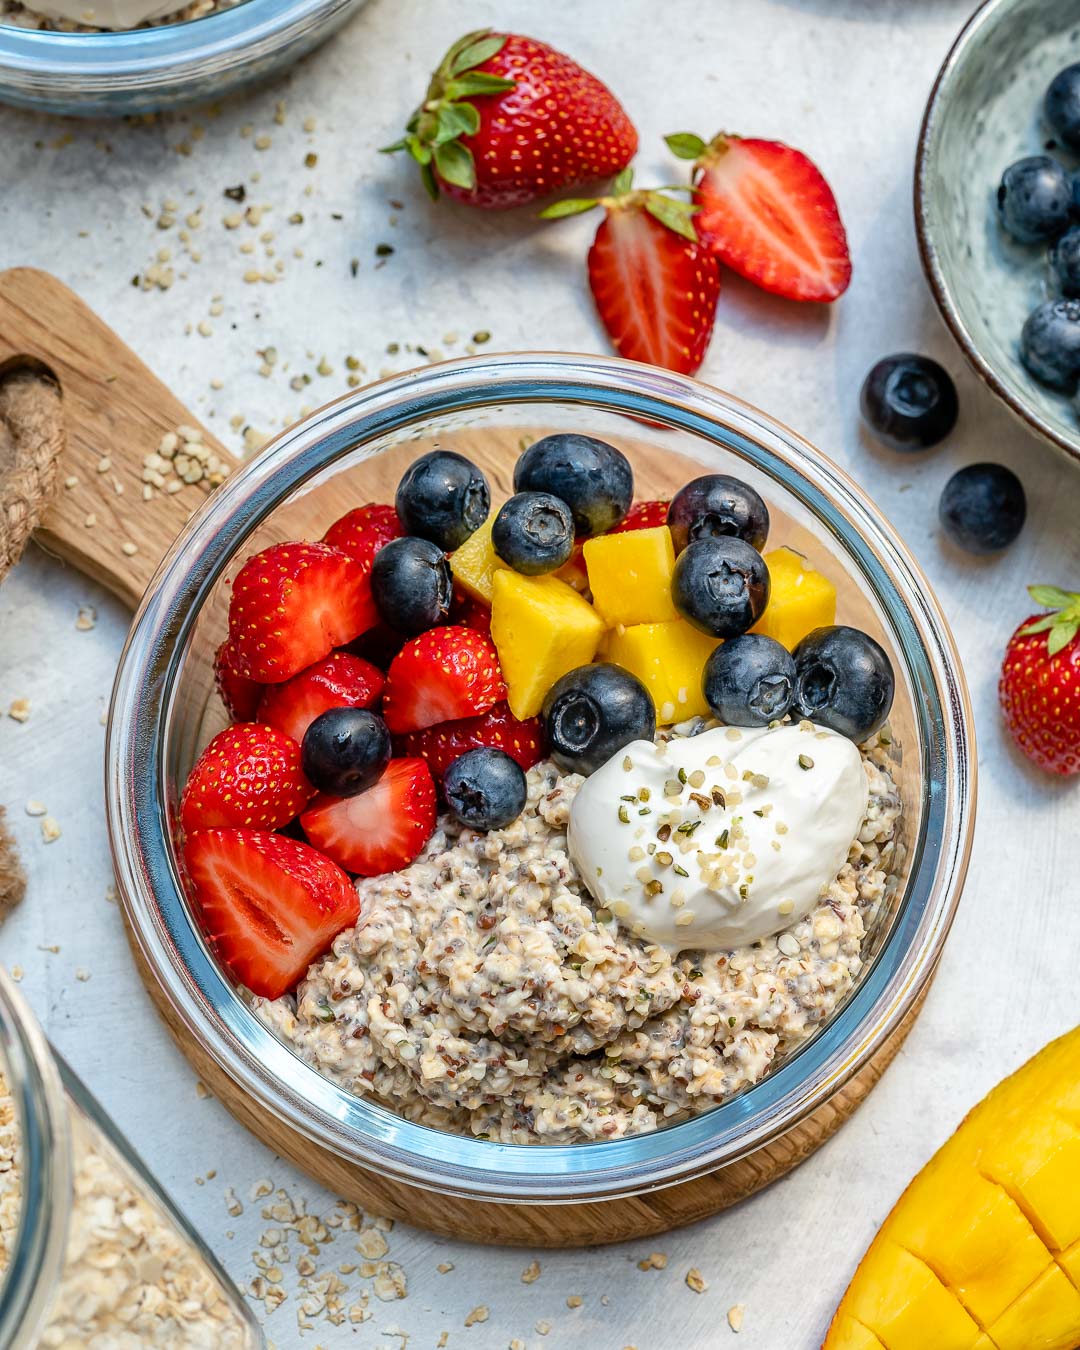 https://cleanfoodcrush.com/wp-content/uploads/2019/06/Overnight-Oat-Meal-Prep-Bowls-by-CFC.jpg